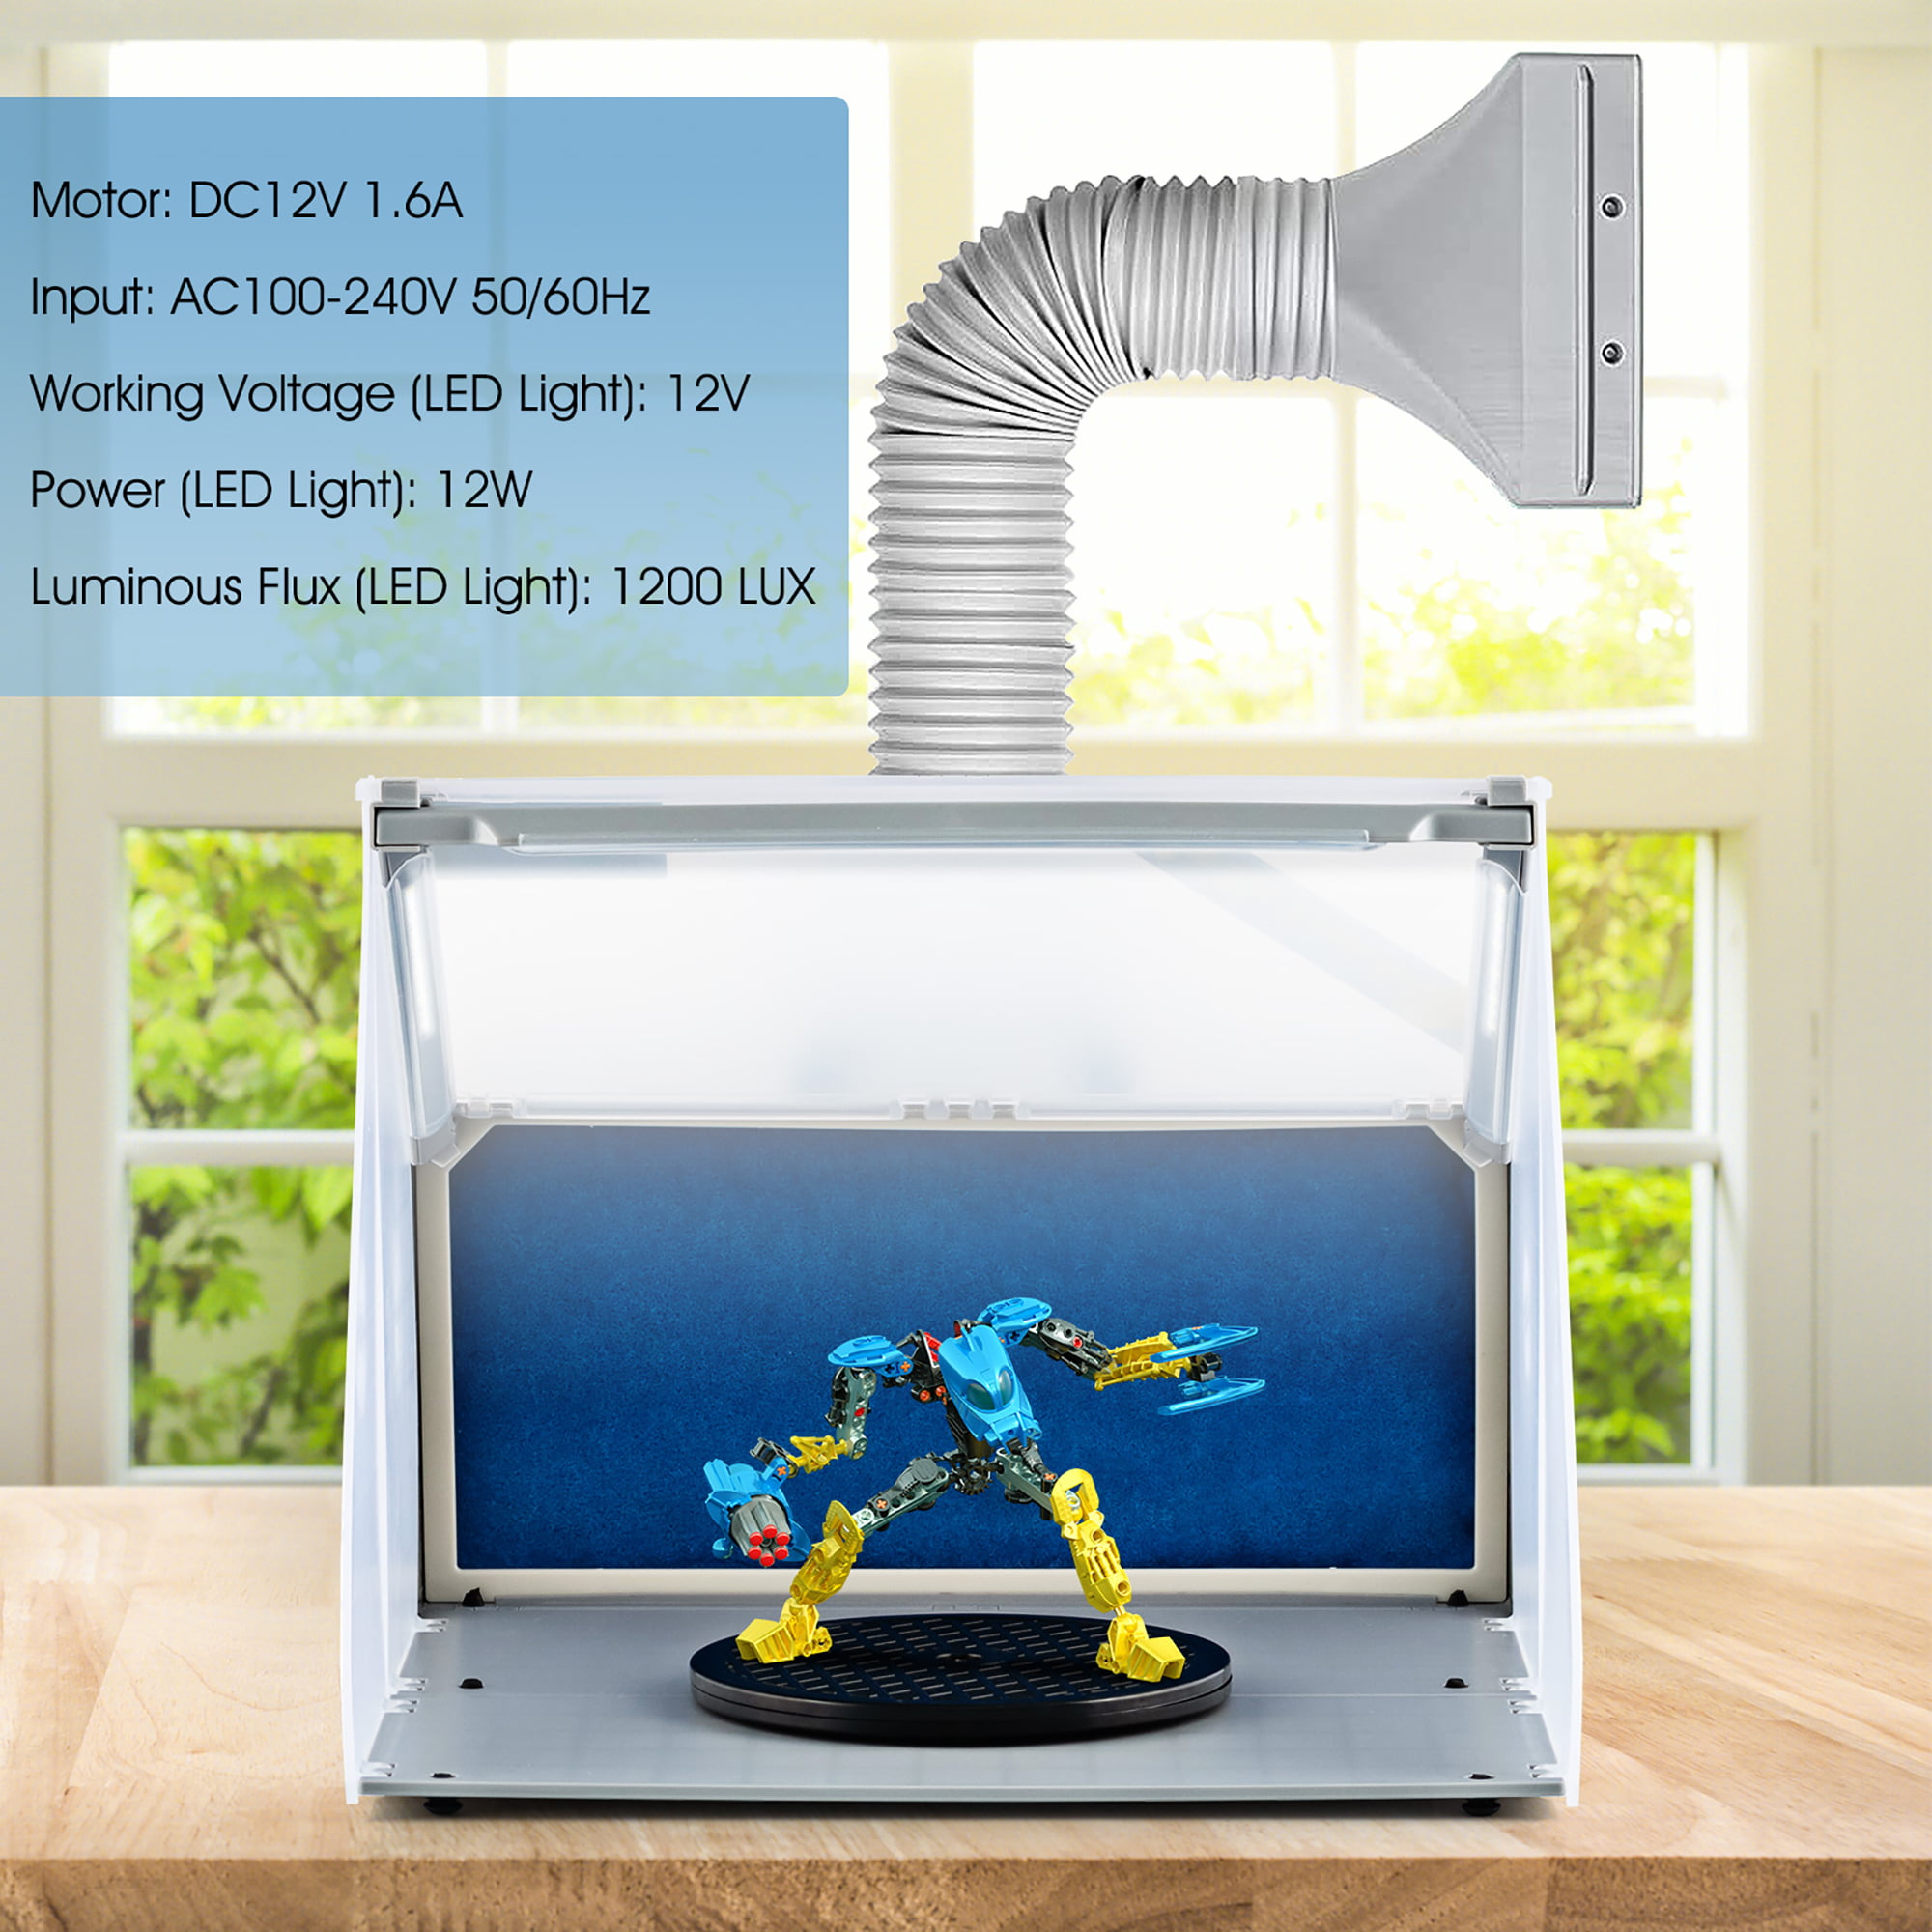 Portable Airbrush Spray Booth Set With LED Lighting For Model Hobby Crafts  And Painting Art Includes Exhaust Filter And Bunnings Hole Saw Set From  Kaolaya, $239.16